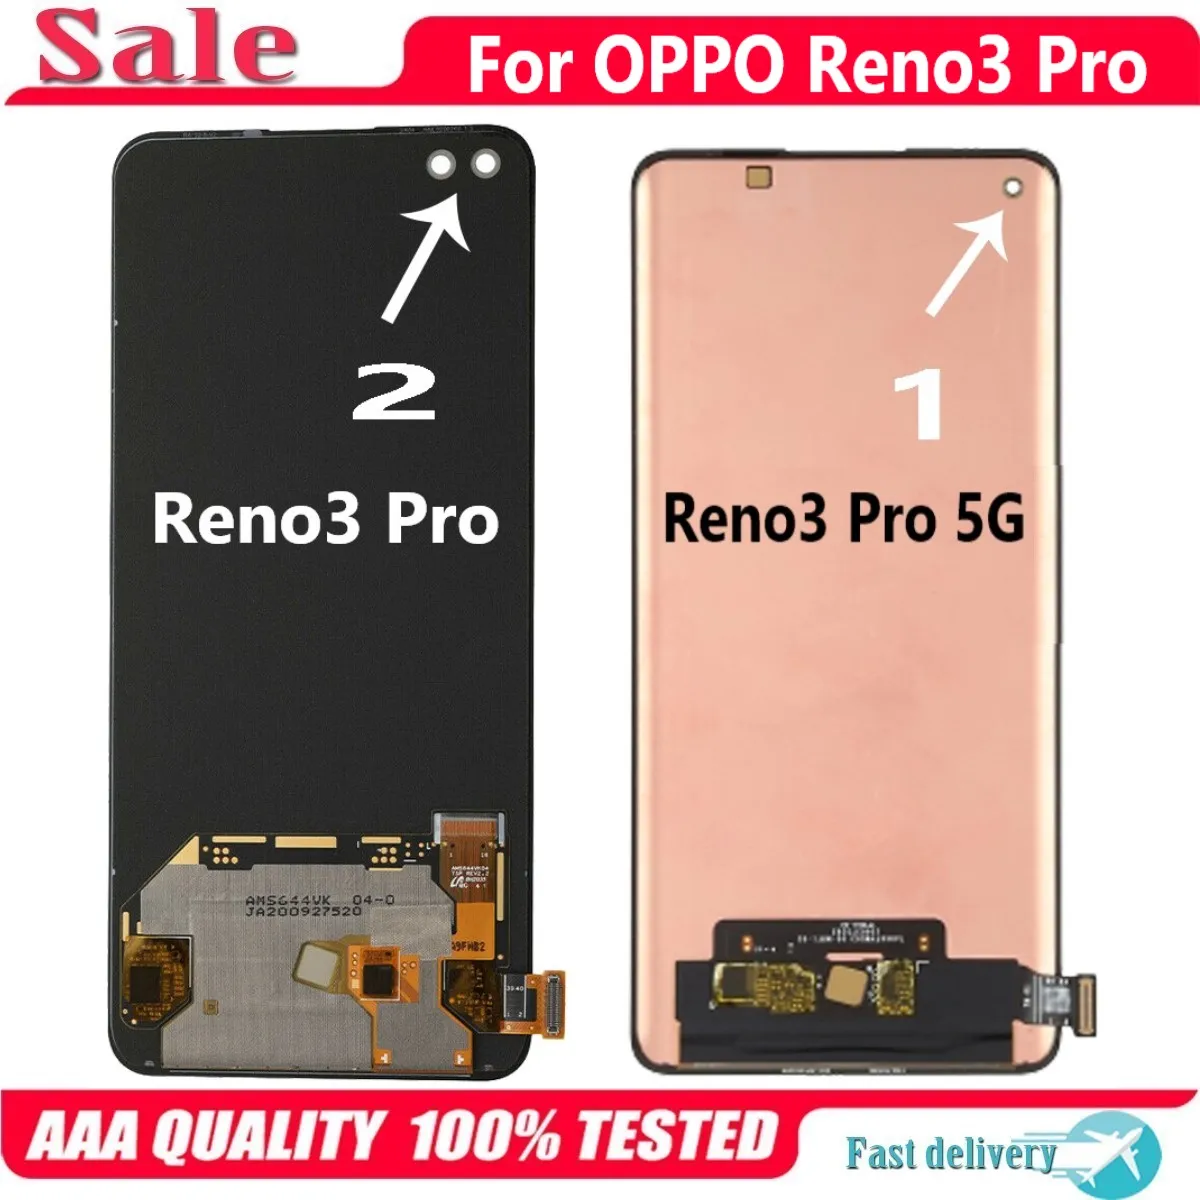 Original For OPPO Reno3 Pro 5G CPH2009 PCRM00 PCRT00 LCD Display Touch Screen Digitizer Assembly For OPPO Reno 3 Pro CPH2035 LCD